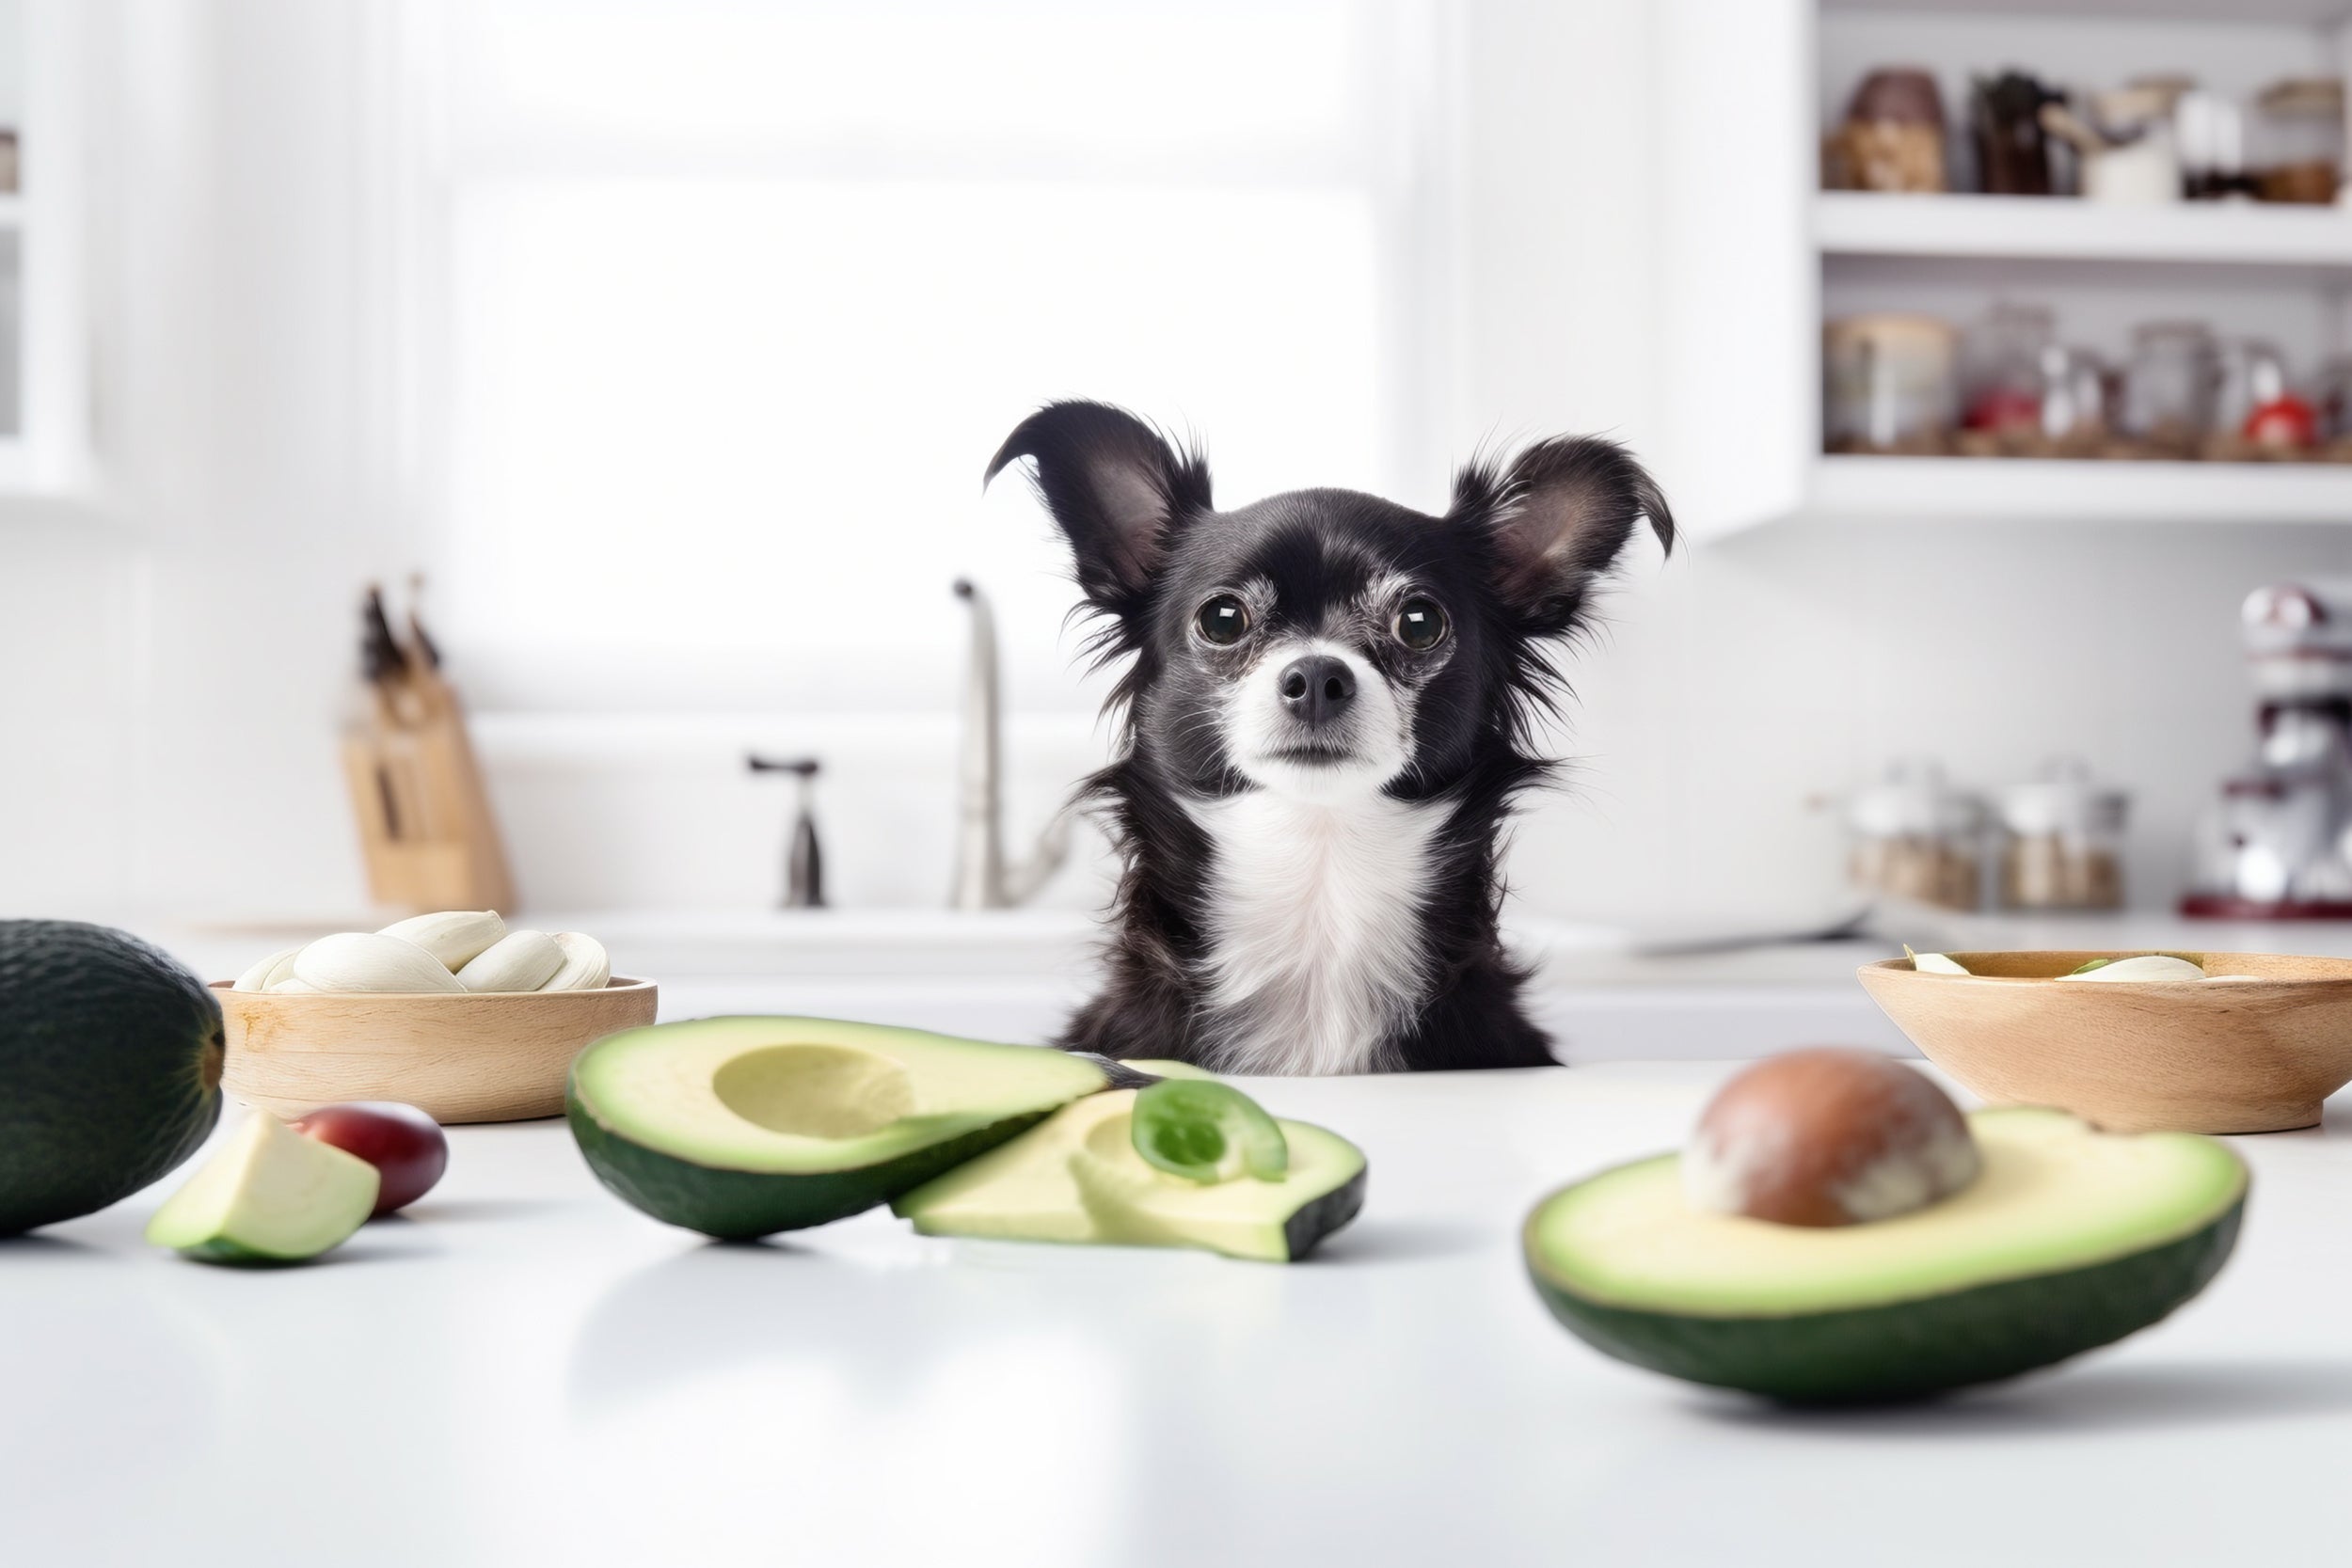 dog looking at avocadoes lying on the kitchen counter